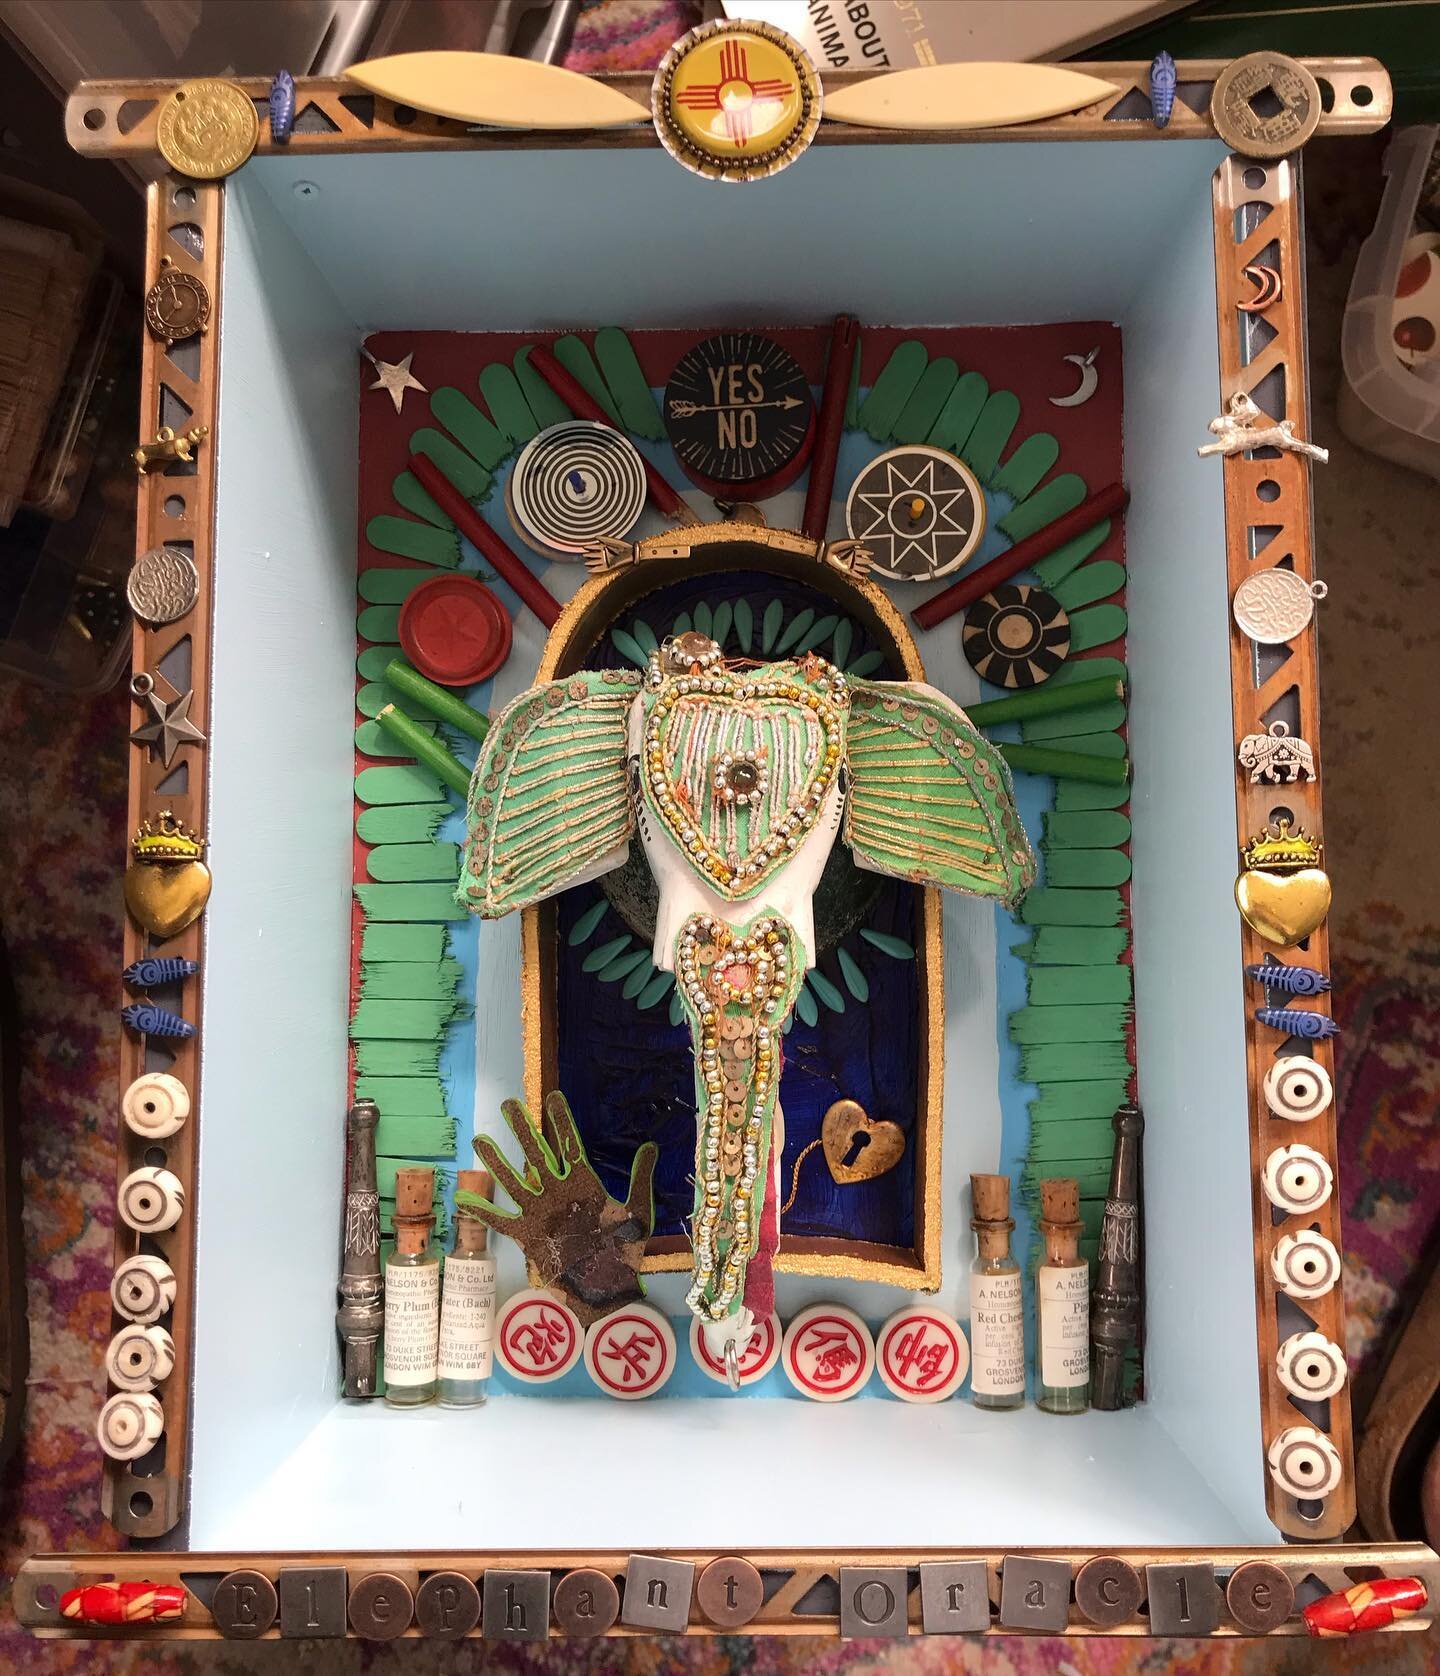 An early draft of a new piece &ldquo;Elephant Oracle.&rdquo; Elephants have been my favorite animal since childhood- not sure why it has taken me so long to do something with this old marionette head that has been knocking around the studio for years